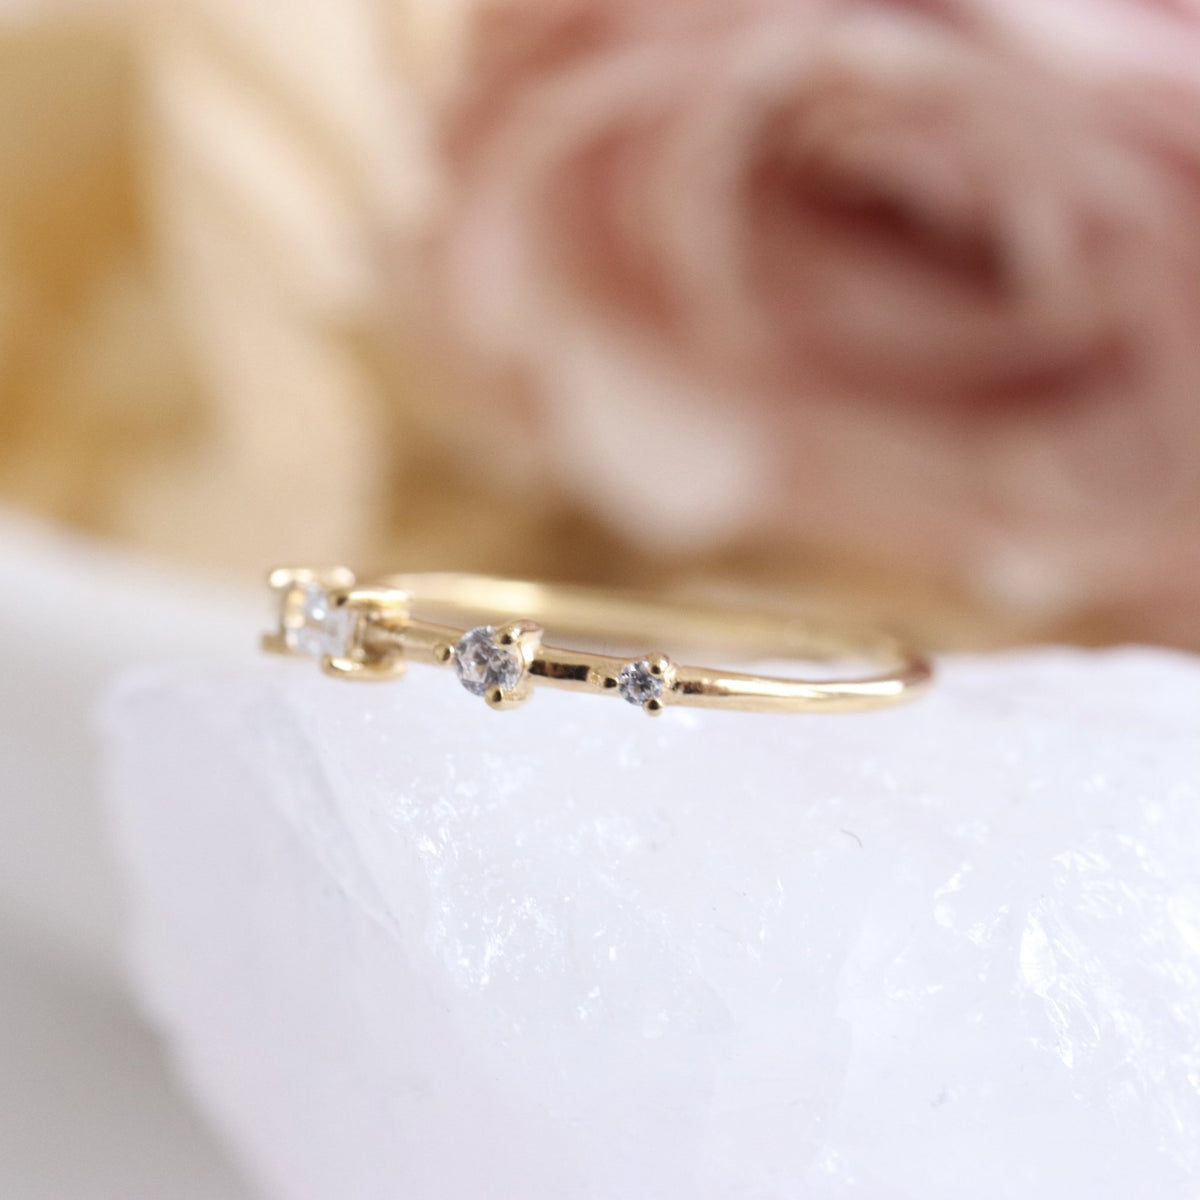 Loyal Dancing Stacking Ring - White Topaz, Cubic Zirconia &amp; Gold - SO PRETTY CARA COTTER